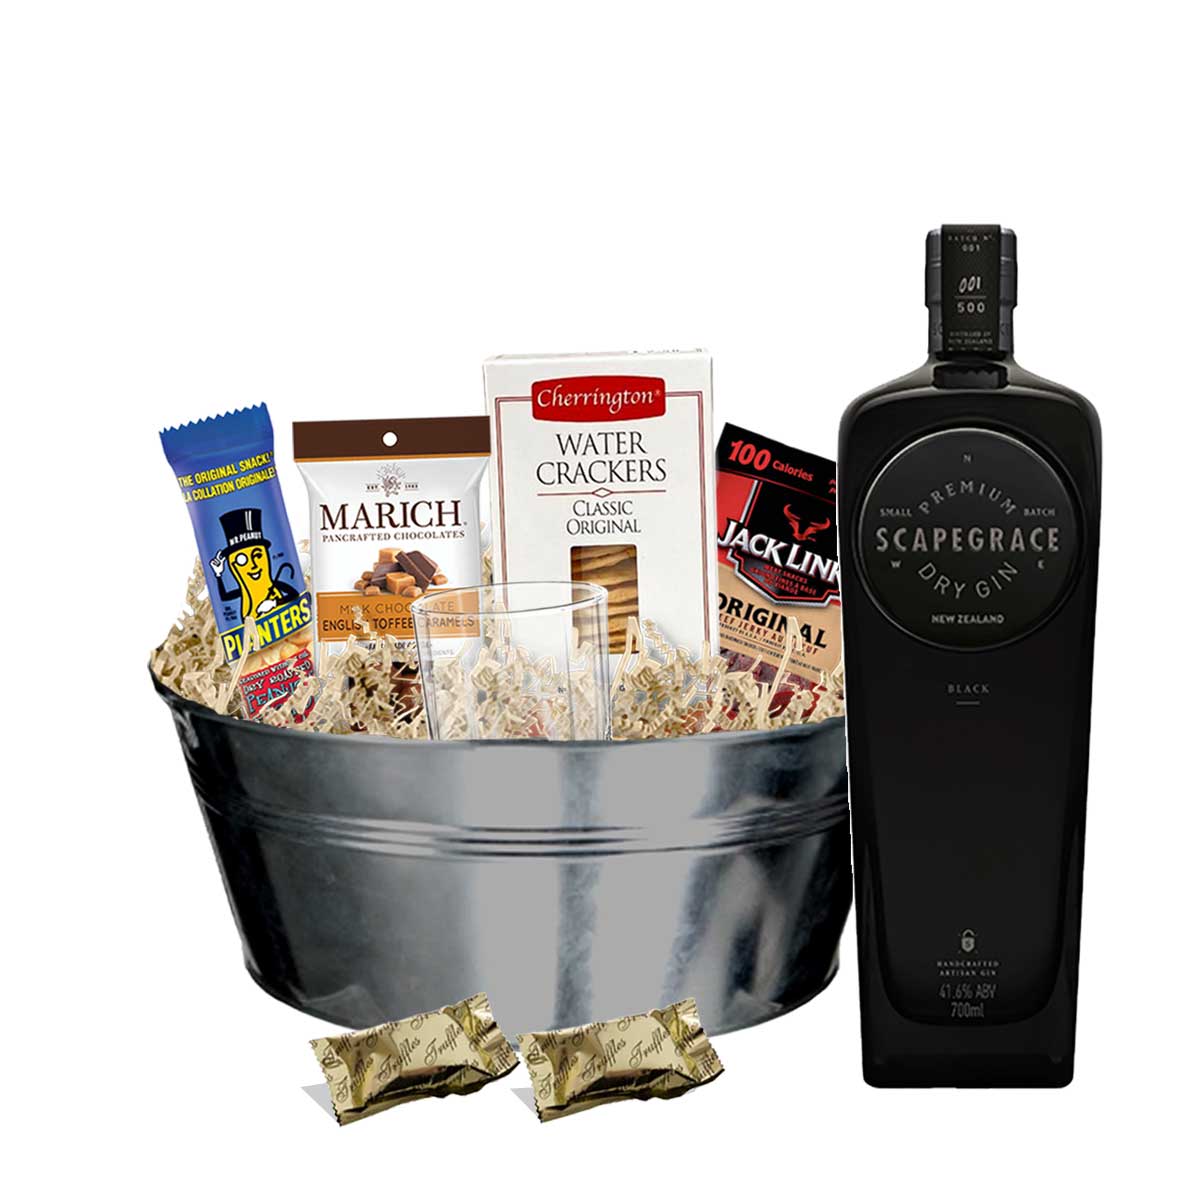 TAG Liquor Stores BC - Scapegrace Black Gin 750ml Gift Basket